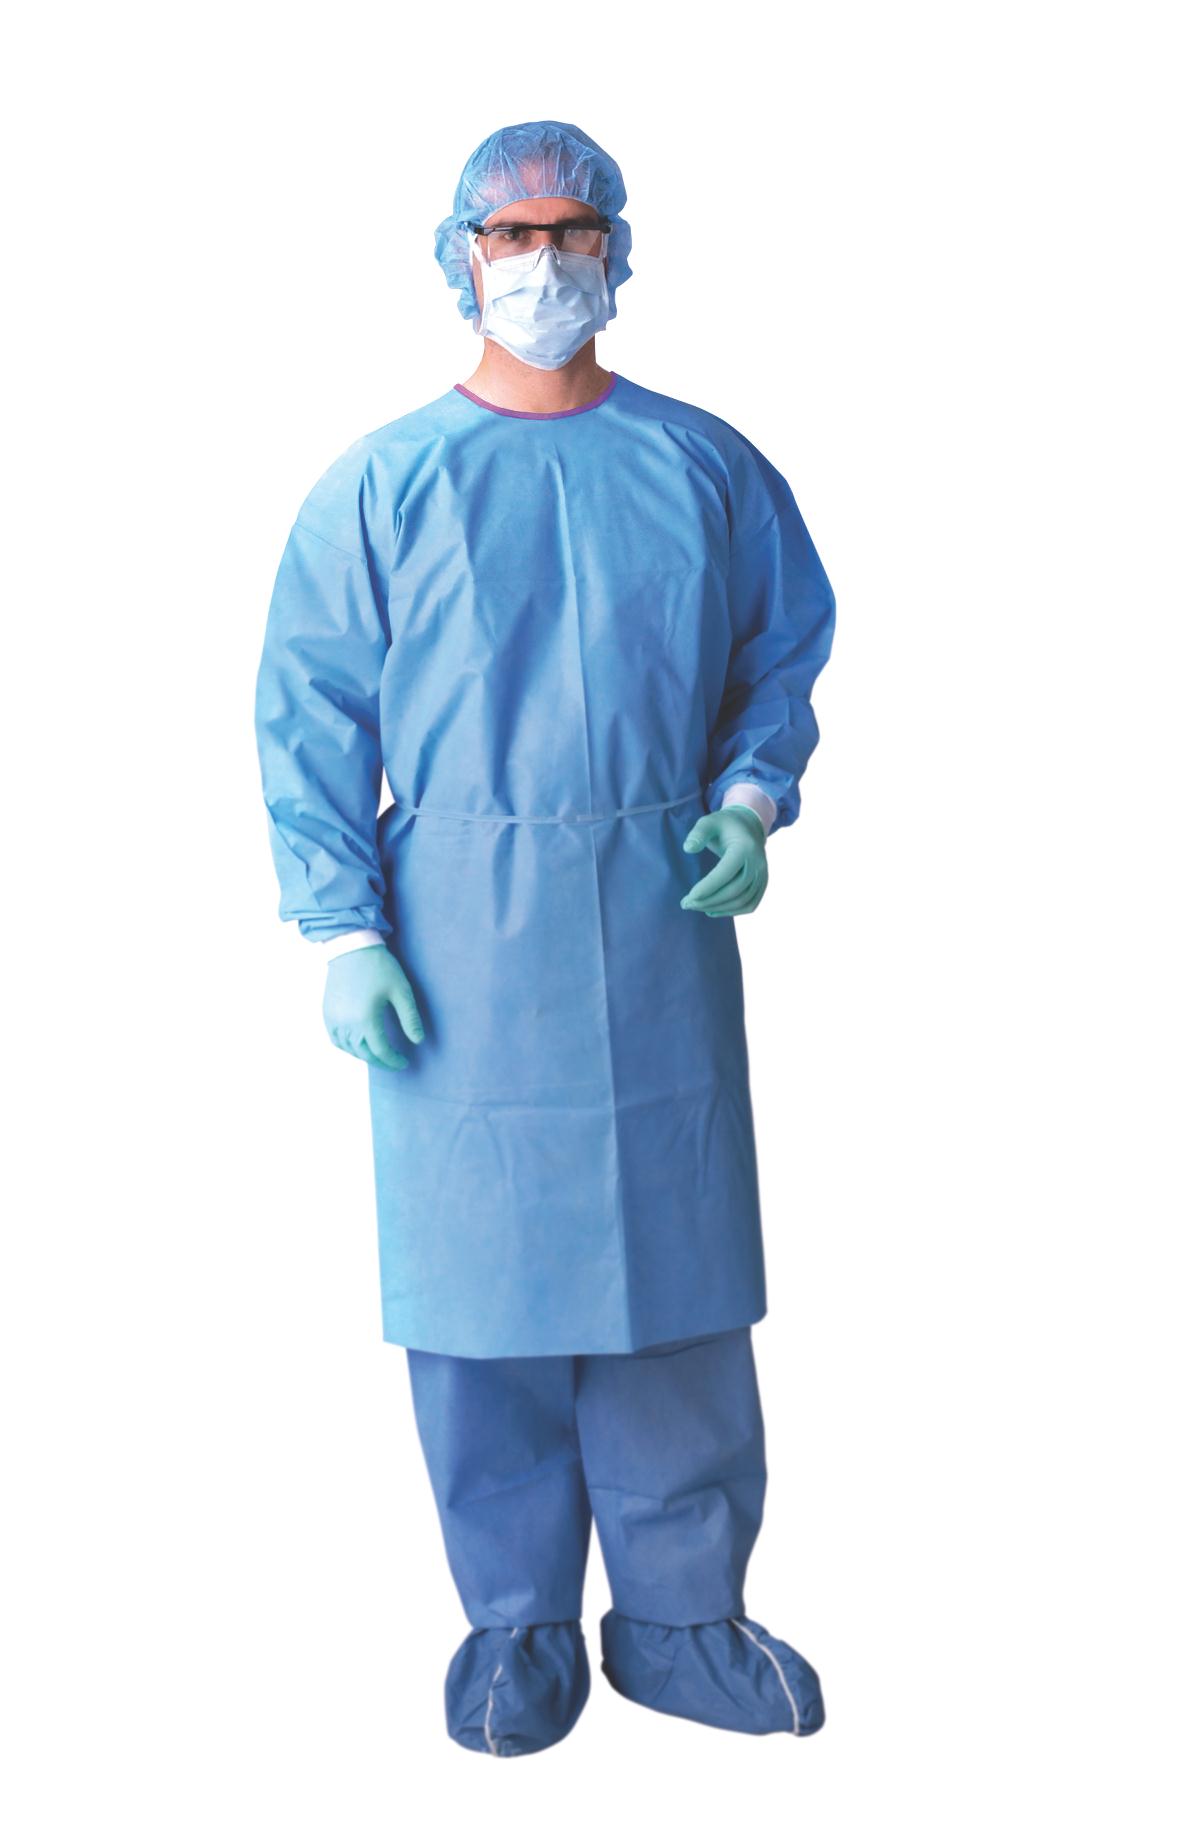 AAMI Level 3 Isolation Gowns - Careway Wellness Center